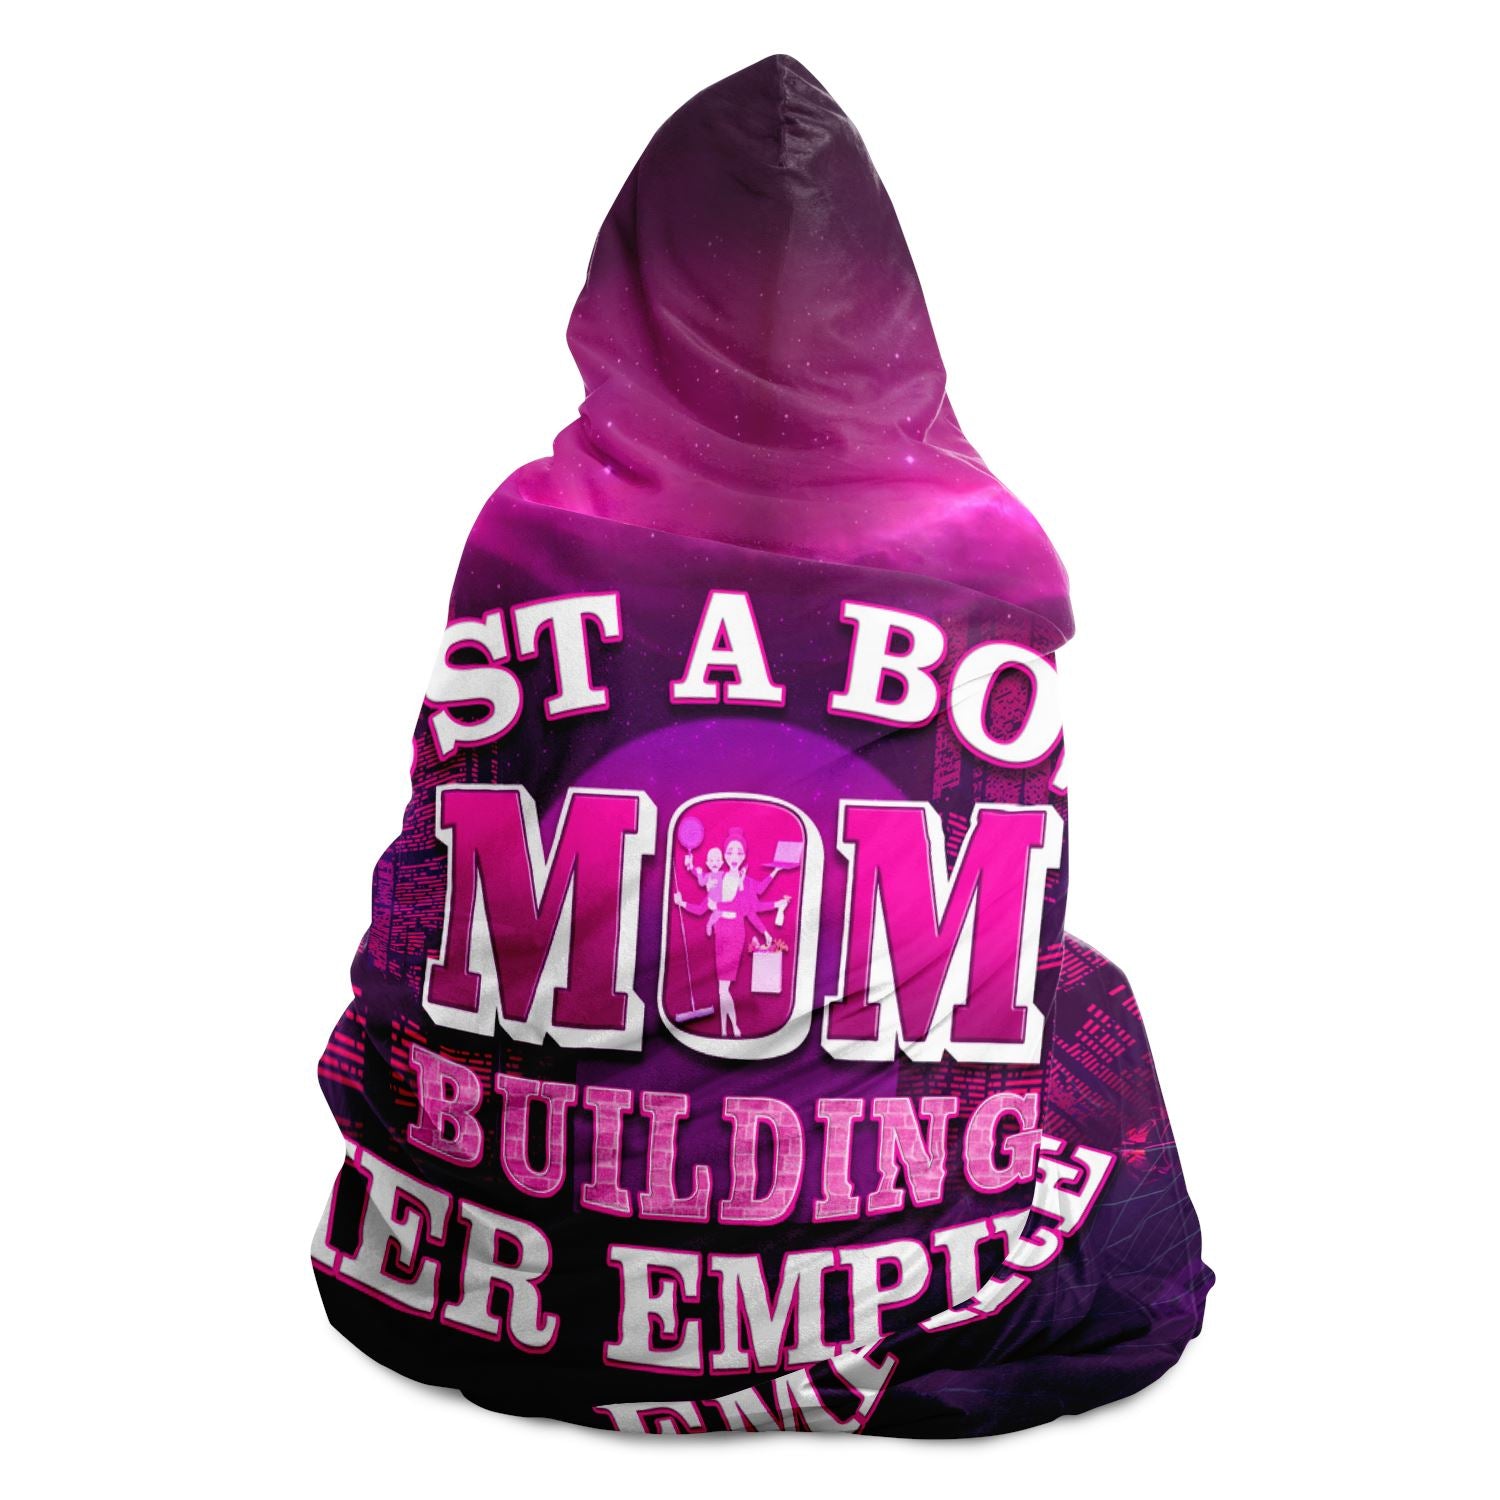 Just A Boss Mom Building Her Empire